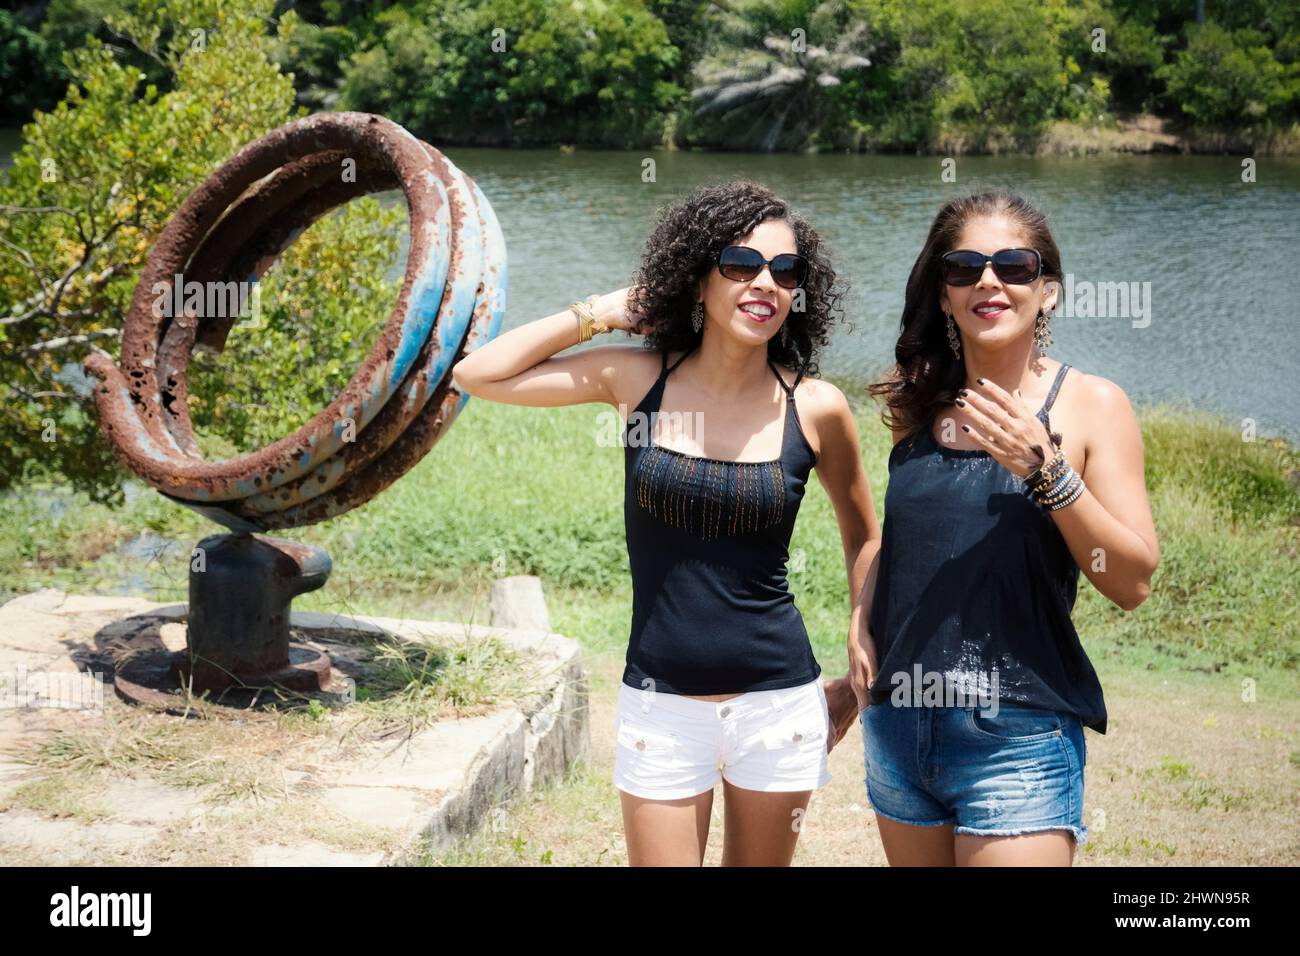 Portrait of two sister women against a river with trees in the background. Salvador, Bahia, Brazil. Stock Photo